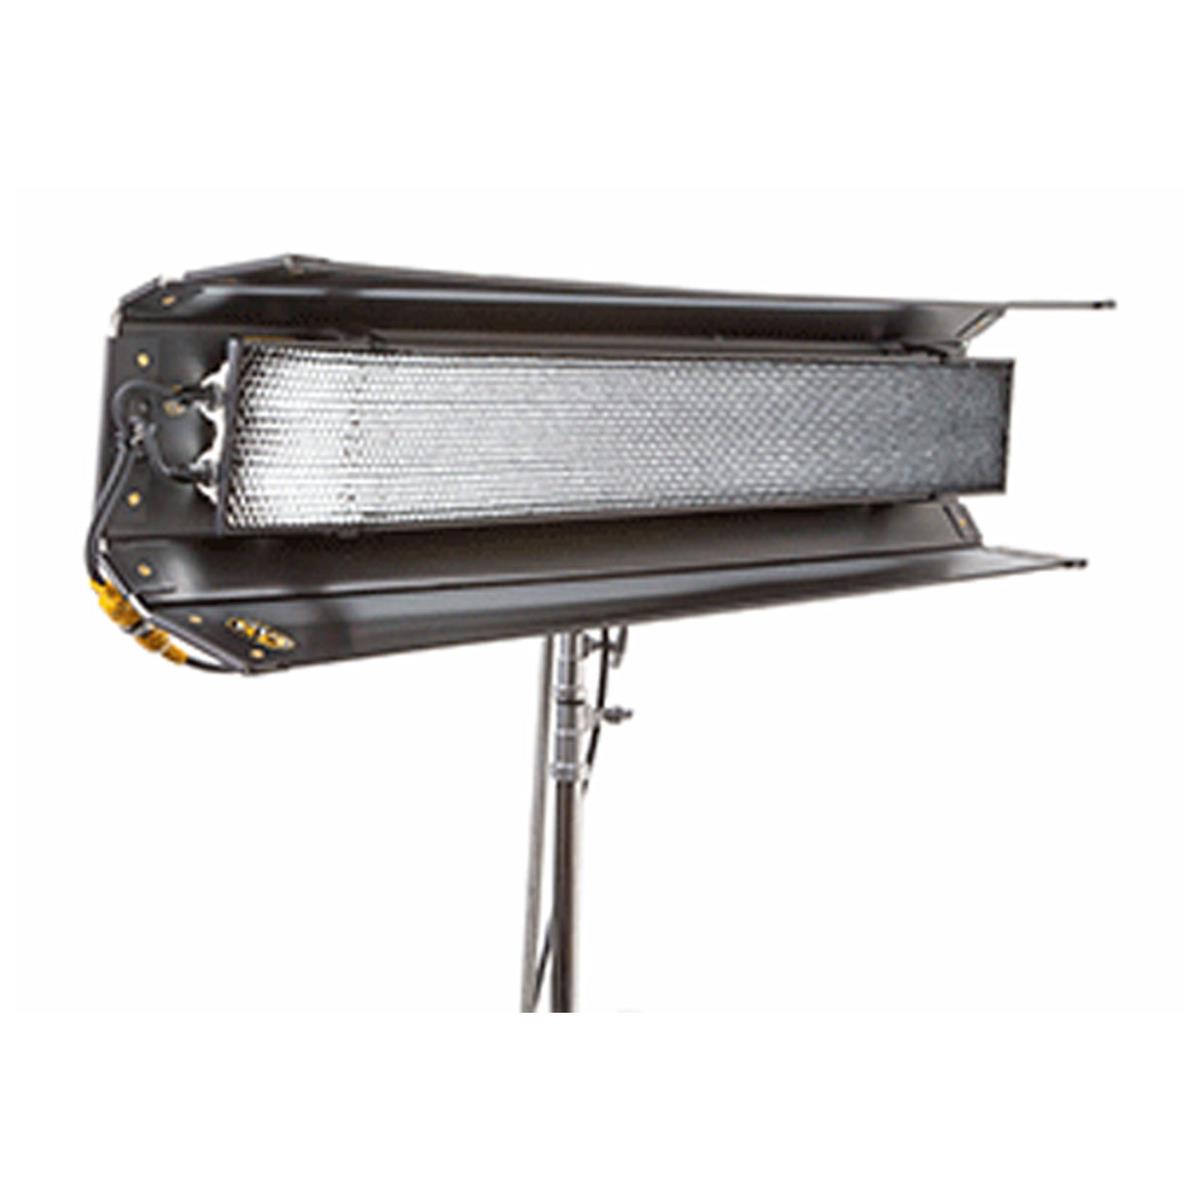 Image of Kino Flo Shell for T42 LED Fixture